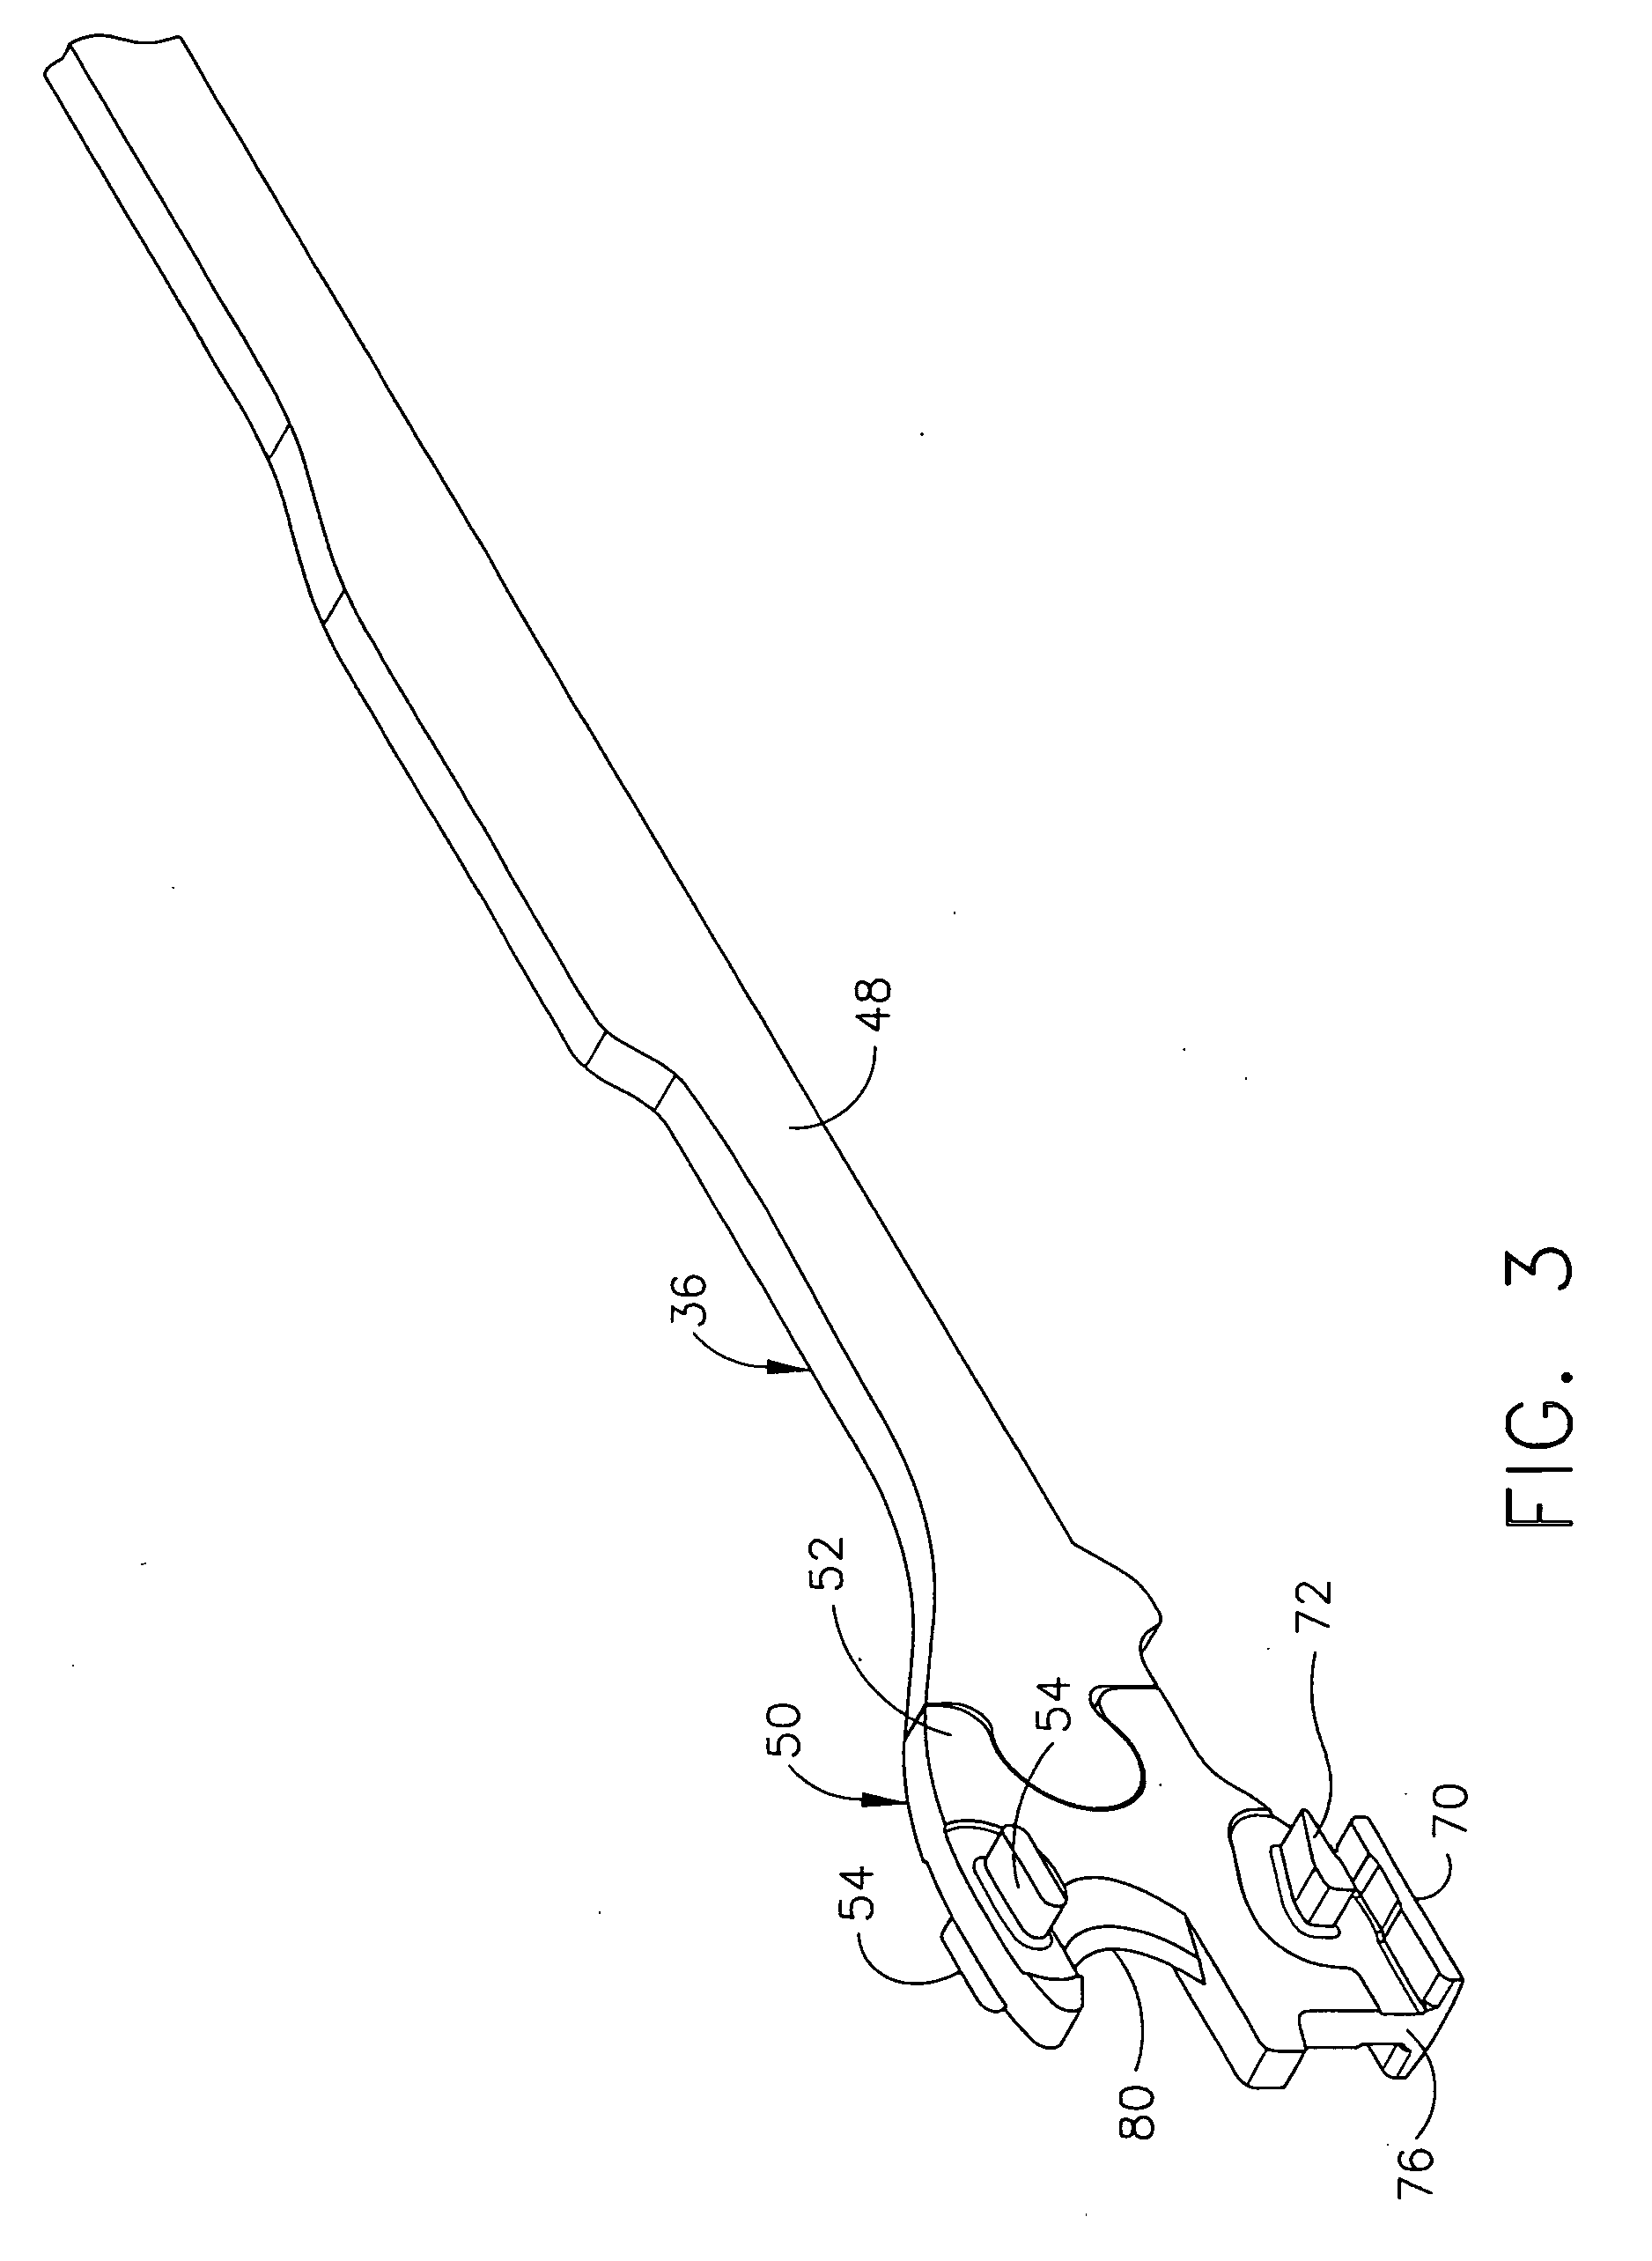 Surgical stapling instruments having flexible channel and anvil features for adjustable staple heights